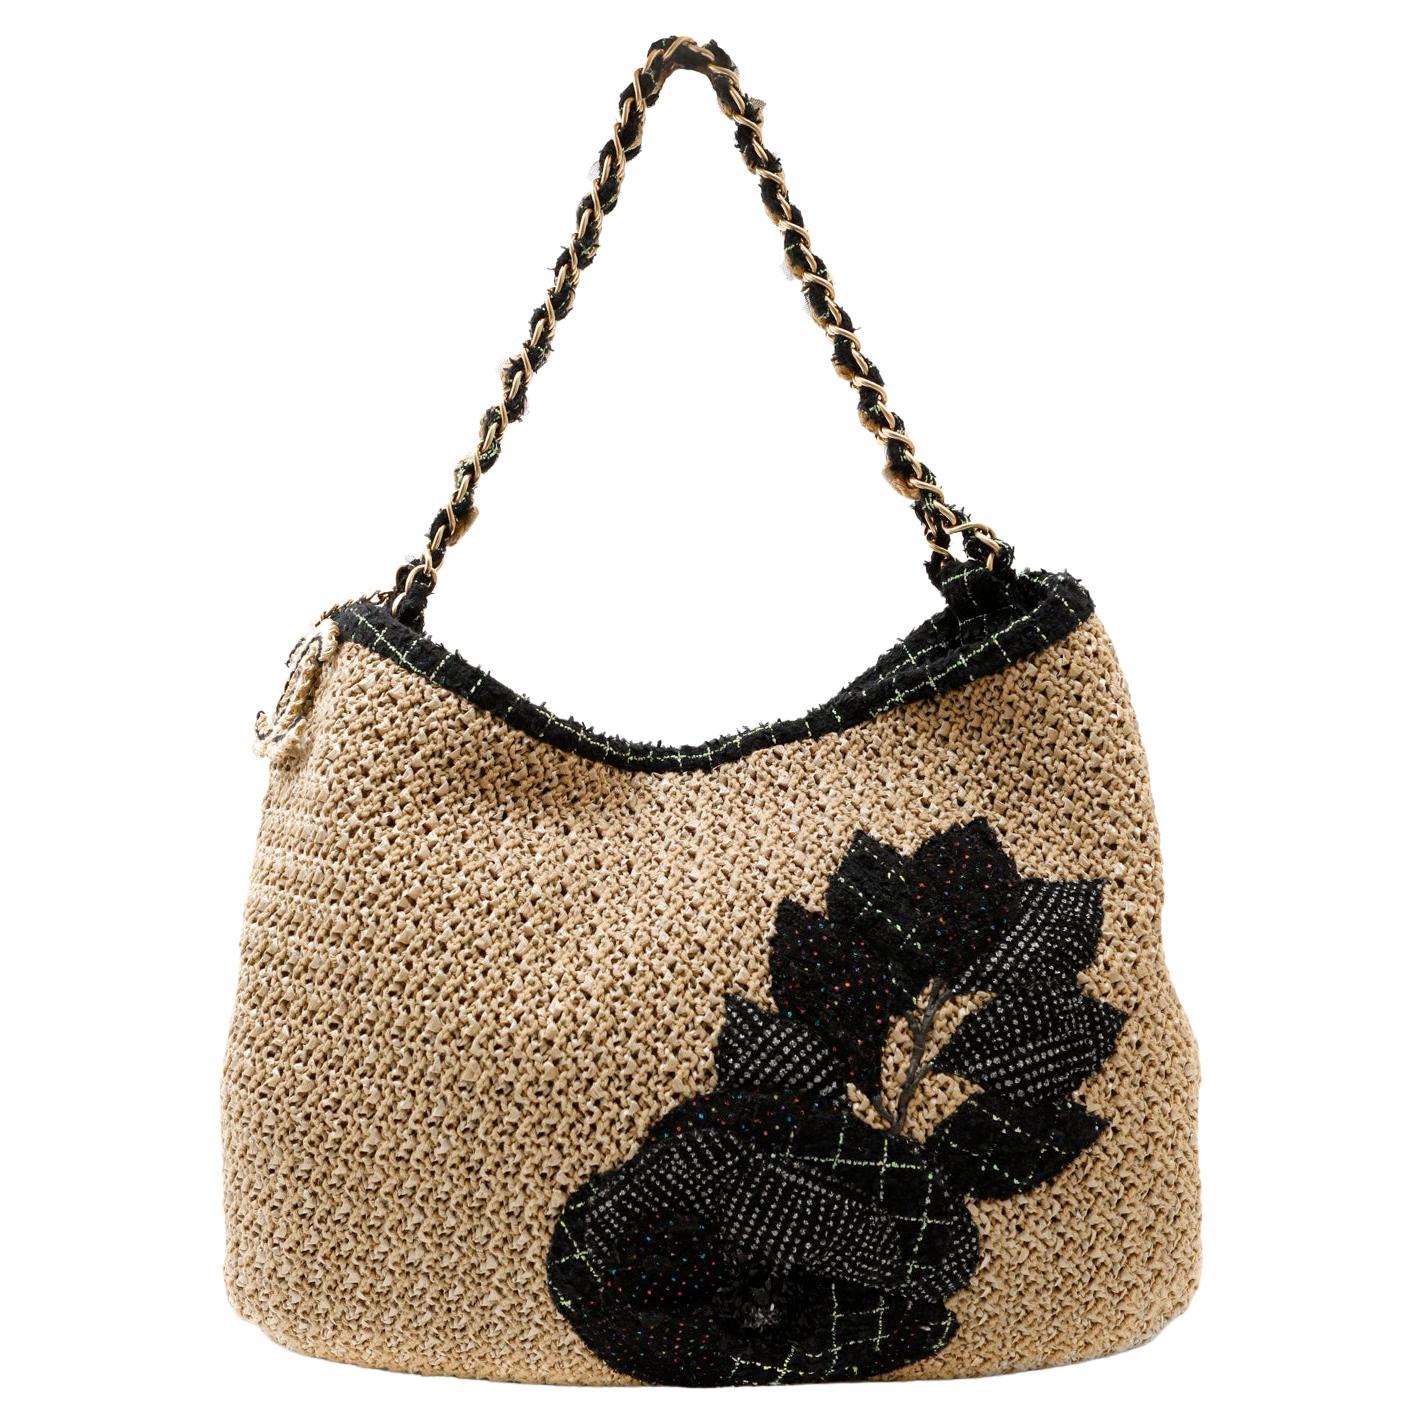 Chanel Coco Country Seagrass Camellia Large Bag